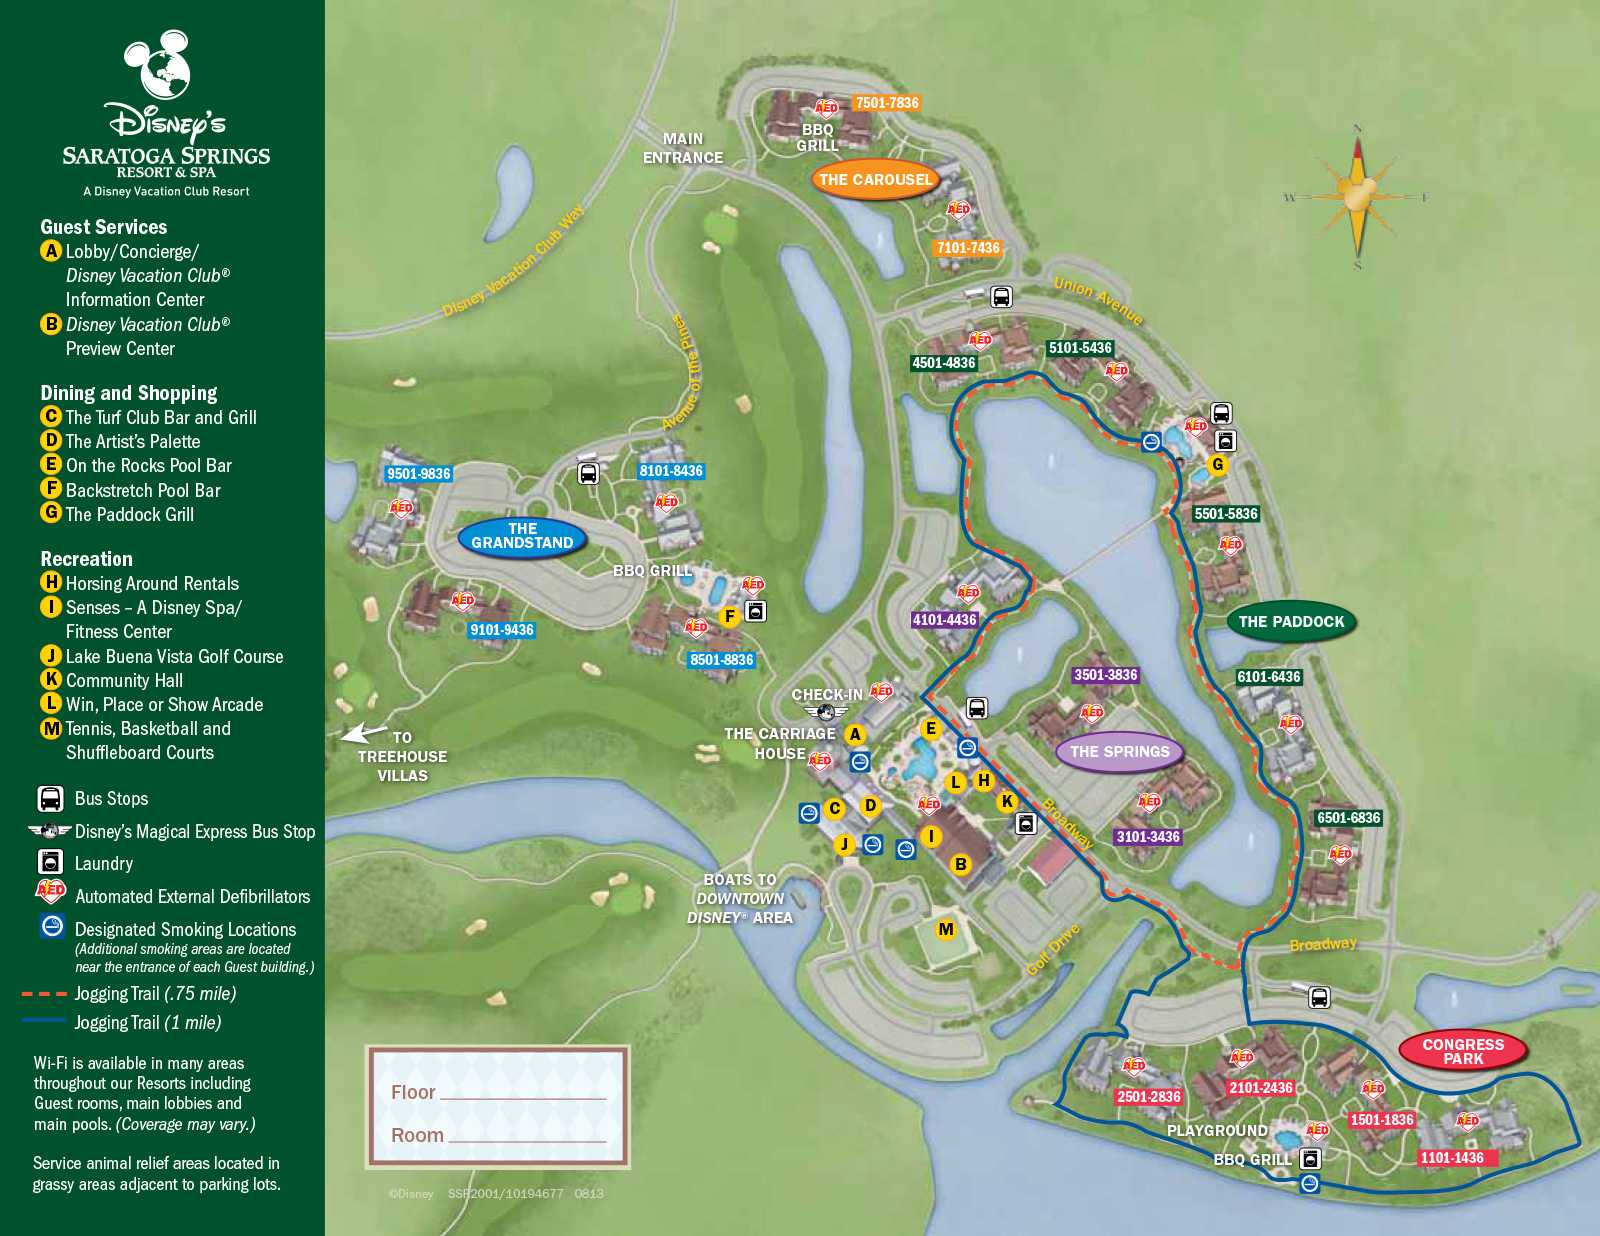 2013 Saratoga Springs guide map Photo 1 of 2